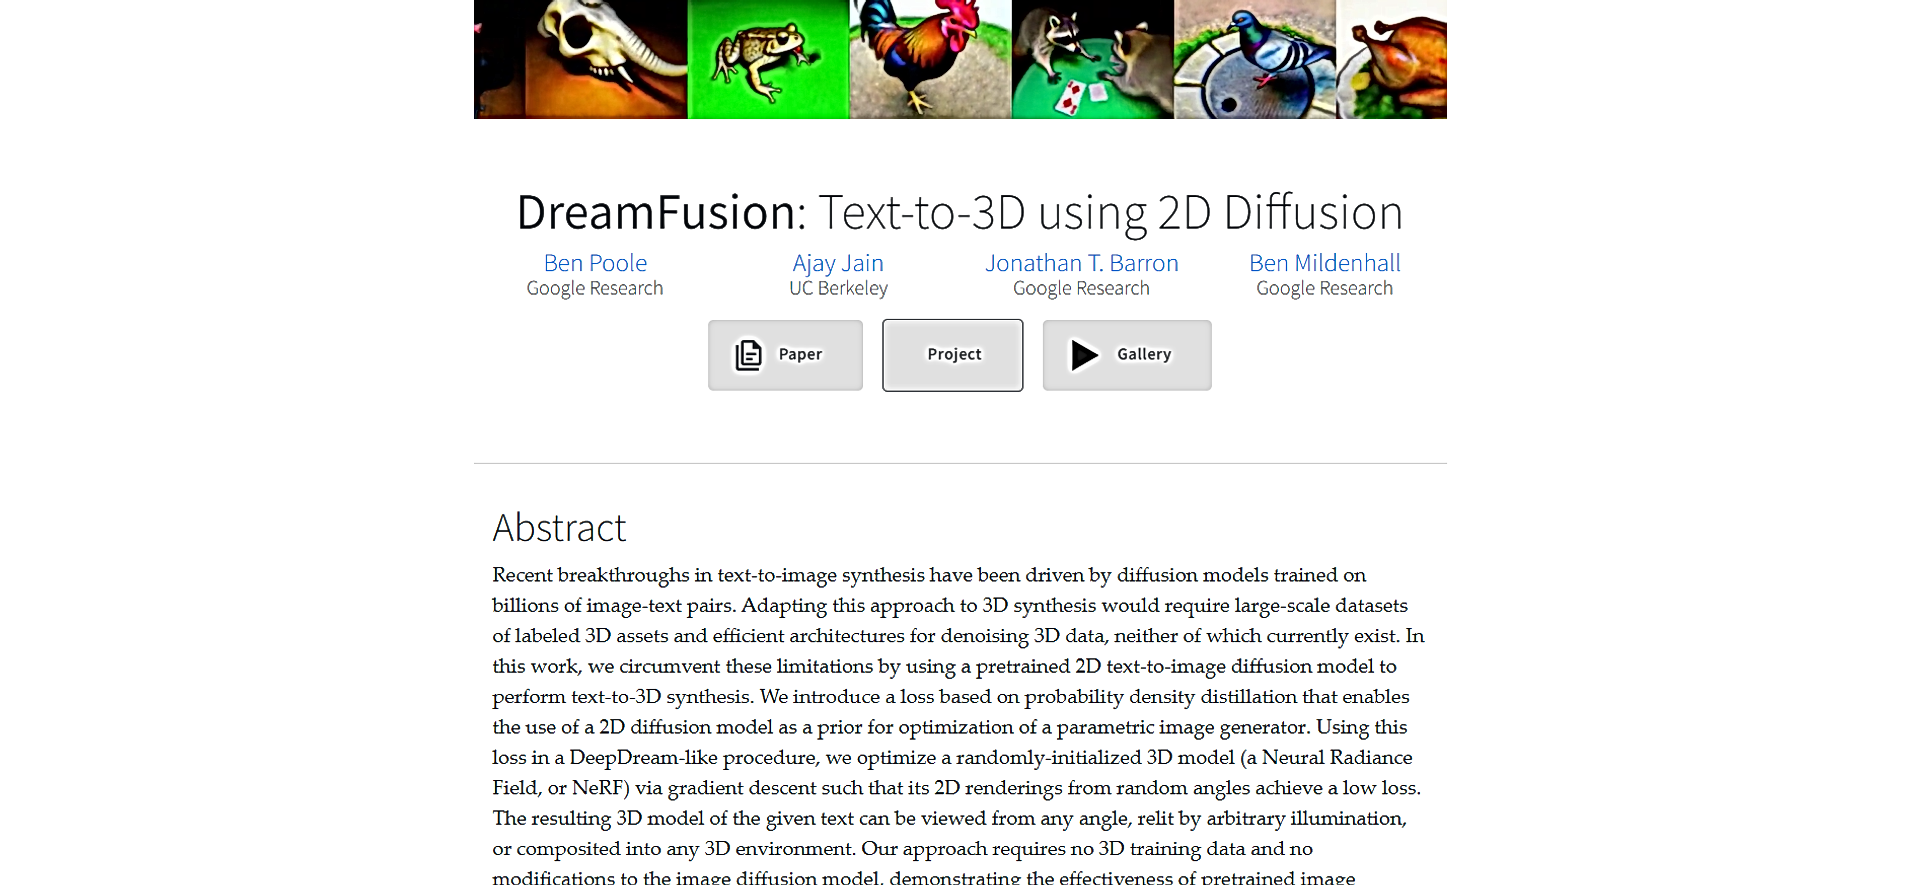 DreamFusion featured